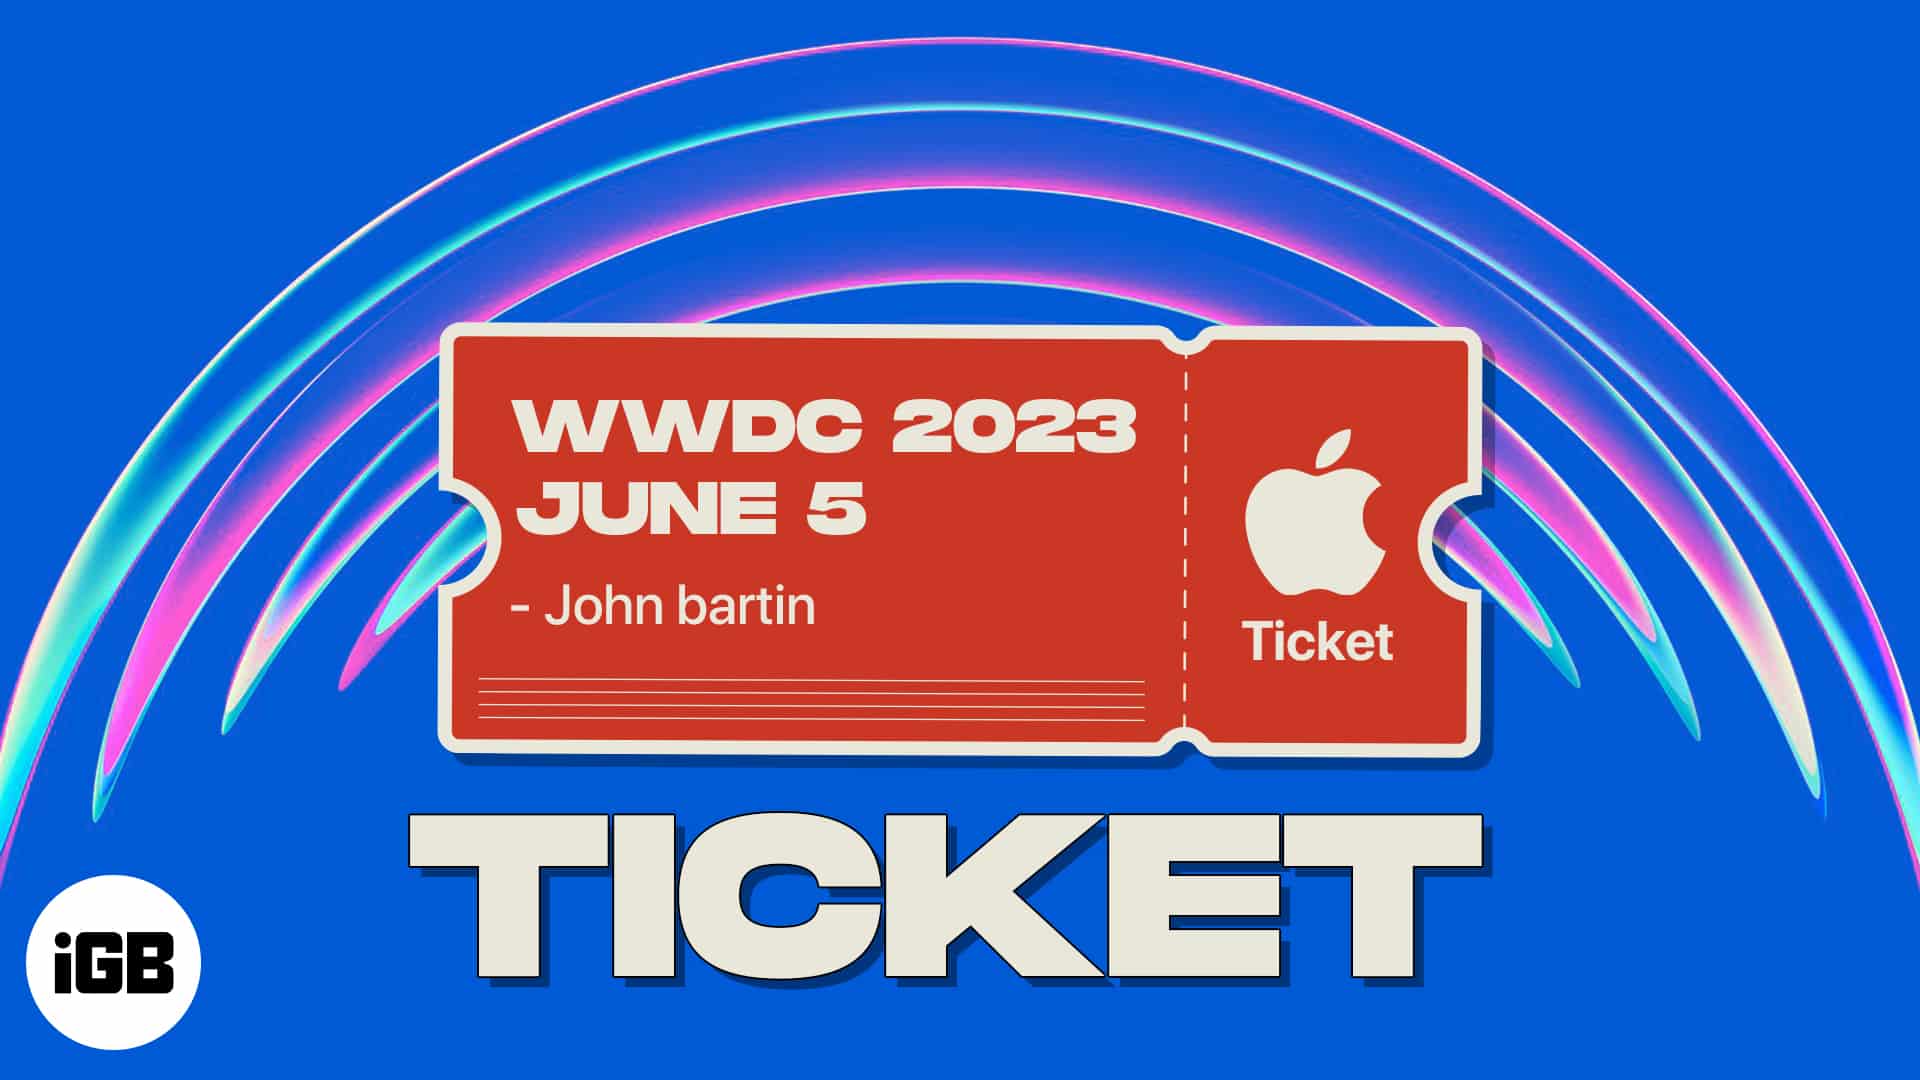 How to get inperson tickets for WWDC 2023 iGeeksBlog